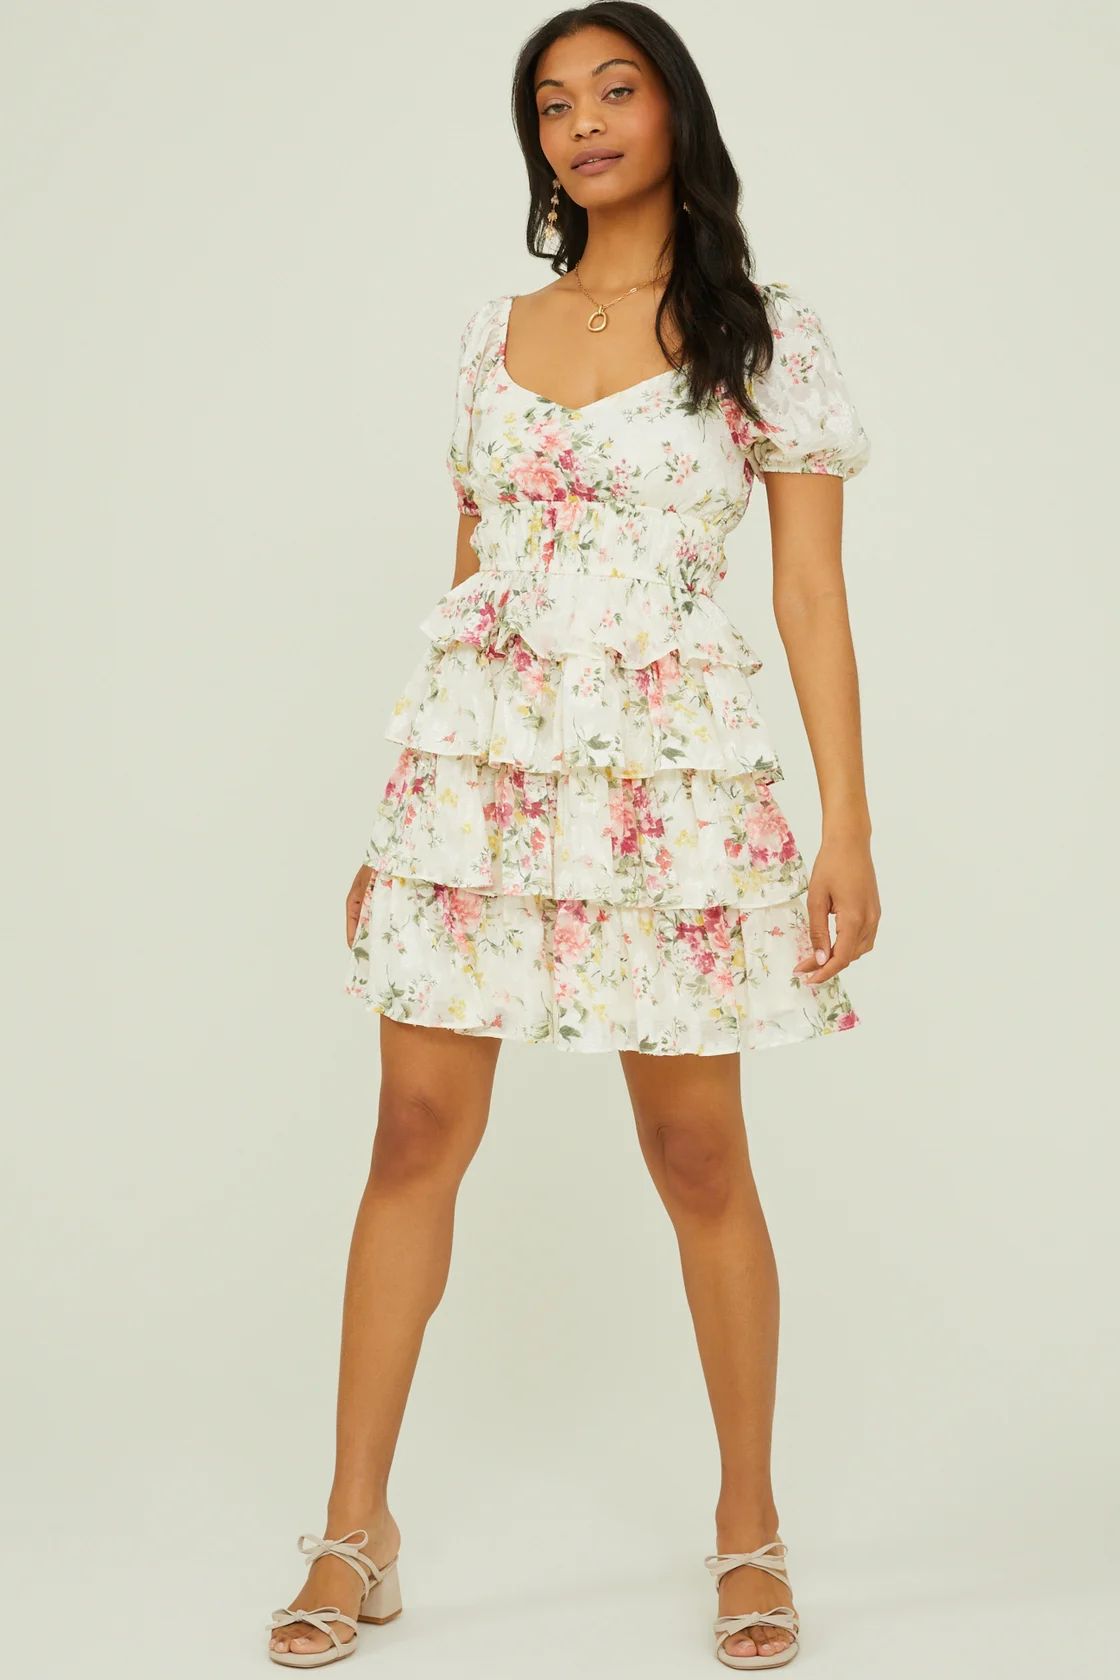 Malia Tiered Floral Dress in Ivory & Pink | Altar'd State | Altar'd State